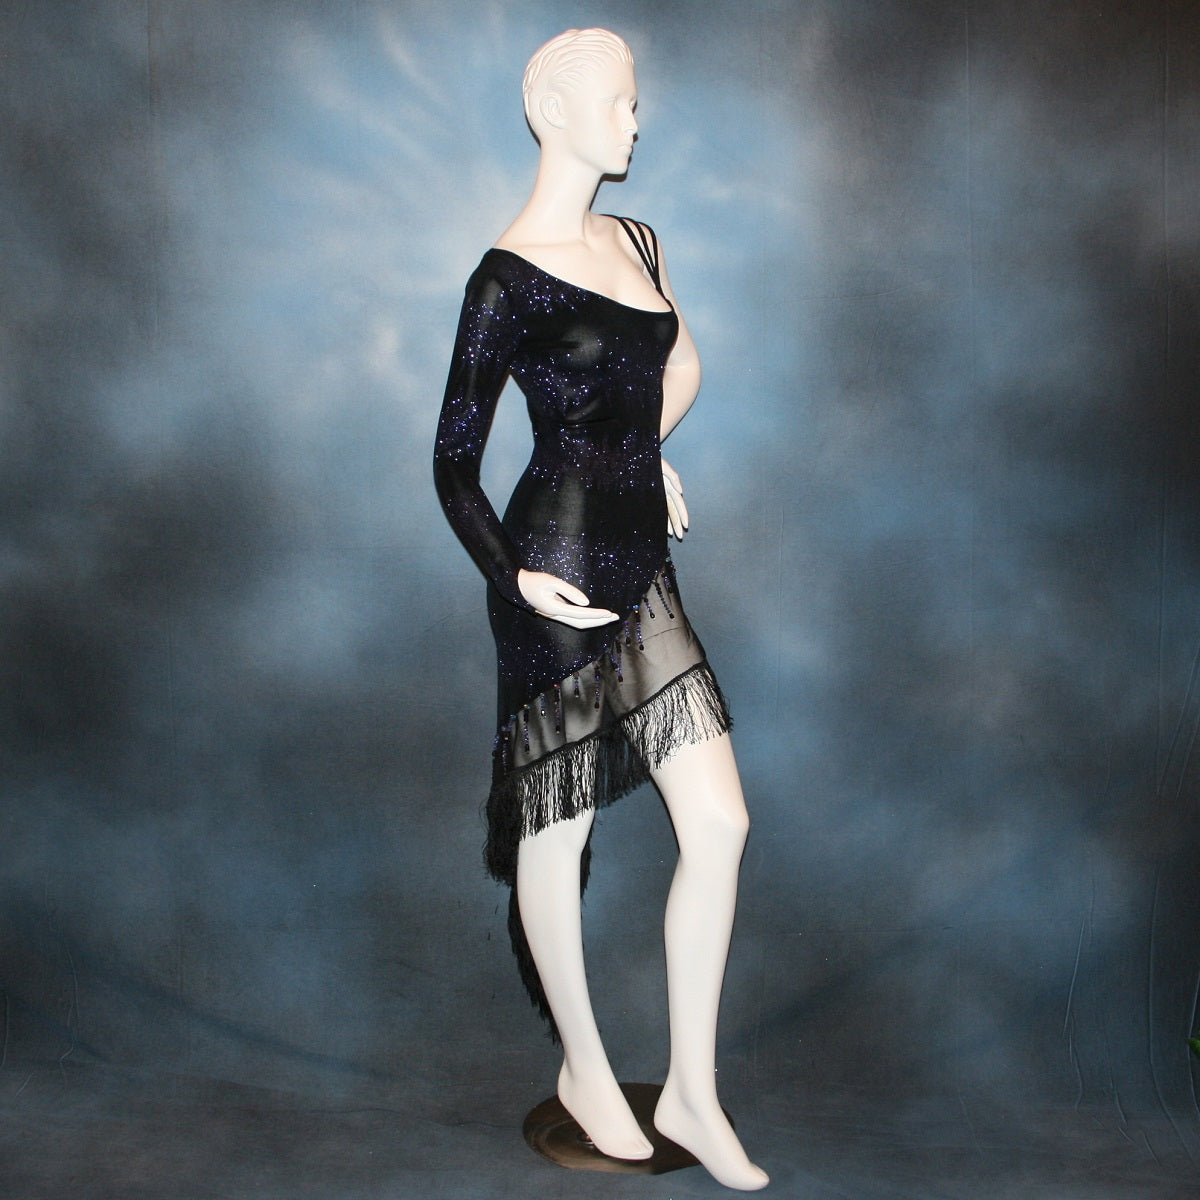 side view of Latin/rhythm/tango dress created in black glitter slinky with an awesome electrifying tanzinite/perwinkle glitter pattern! It features one long sleeve, lattice work detailing up the left side, a short skirt line in front that angles down to a long peak in the back, with a sheer mesh inset, fringe & Swarovski hand beading in tanzanite & black.